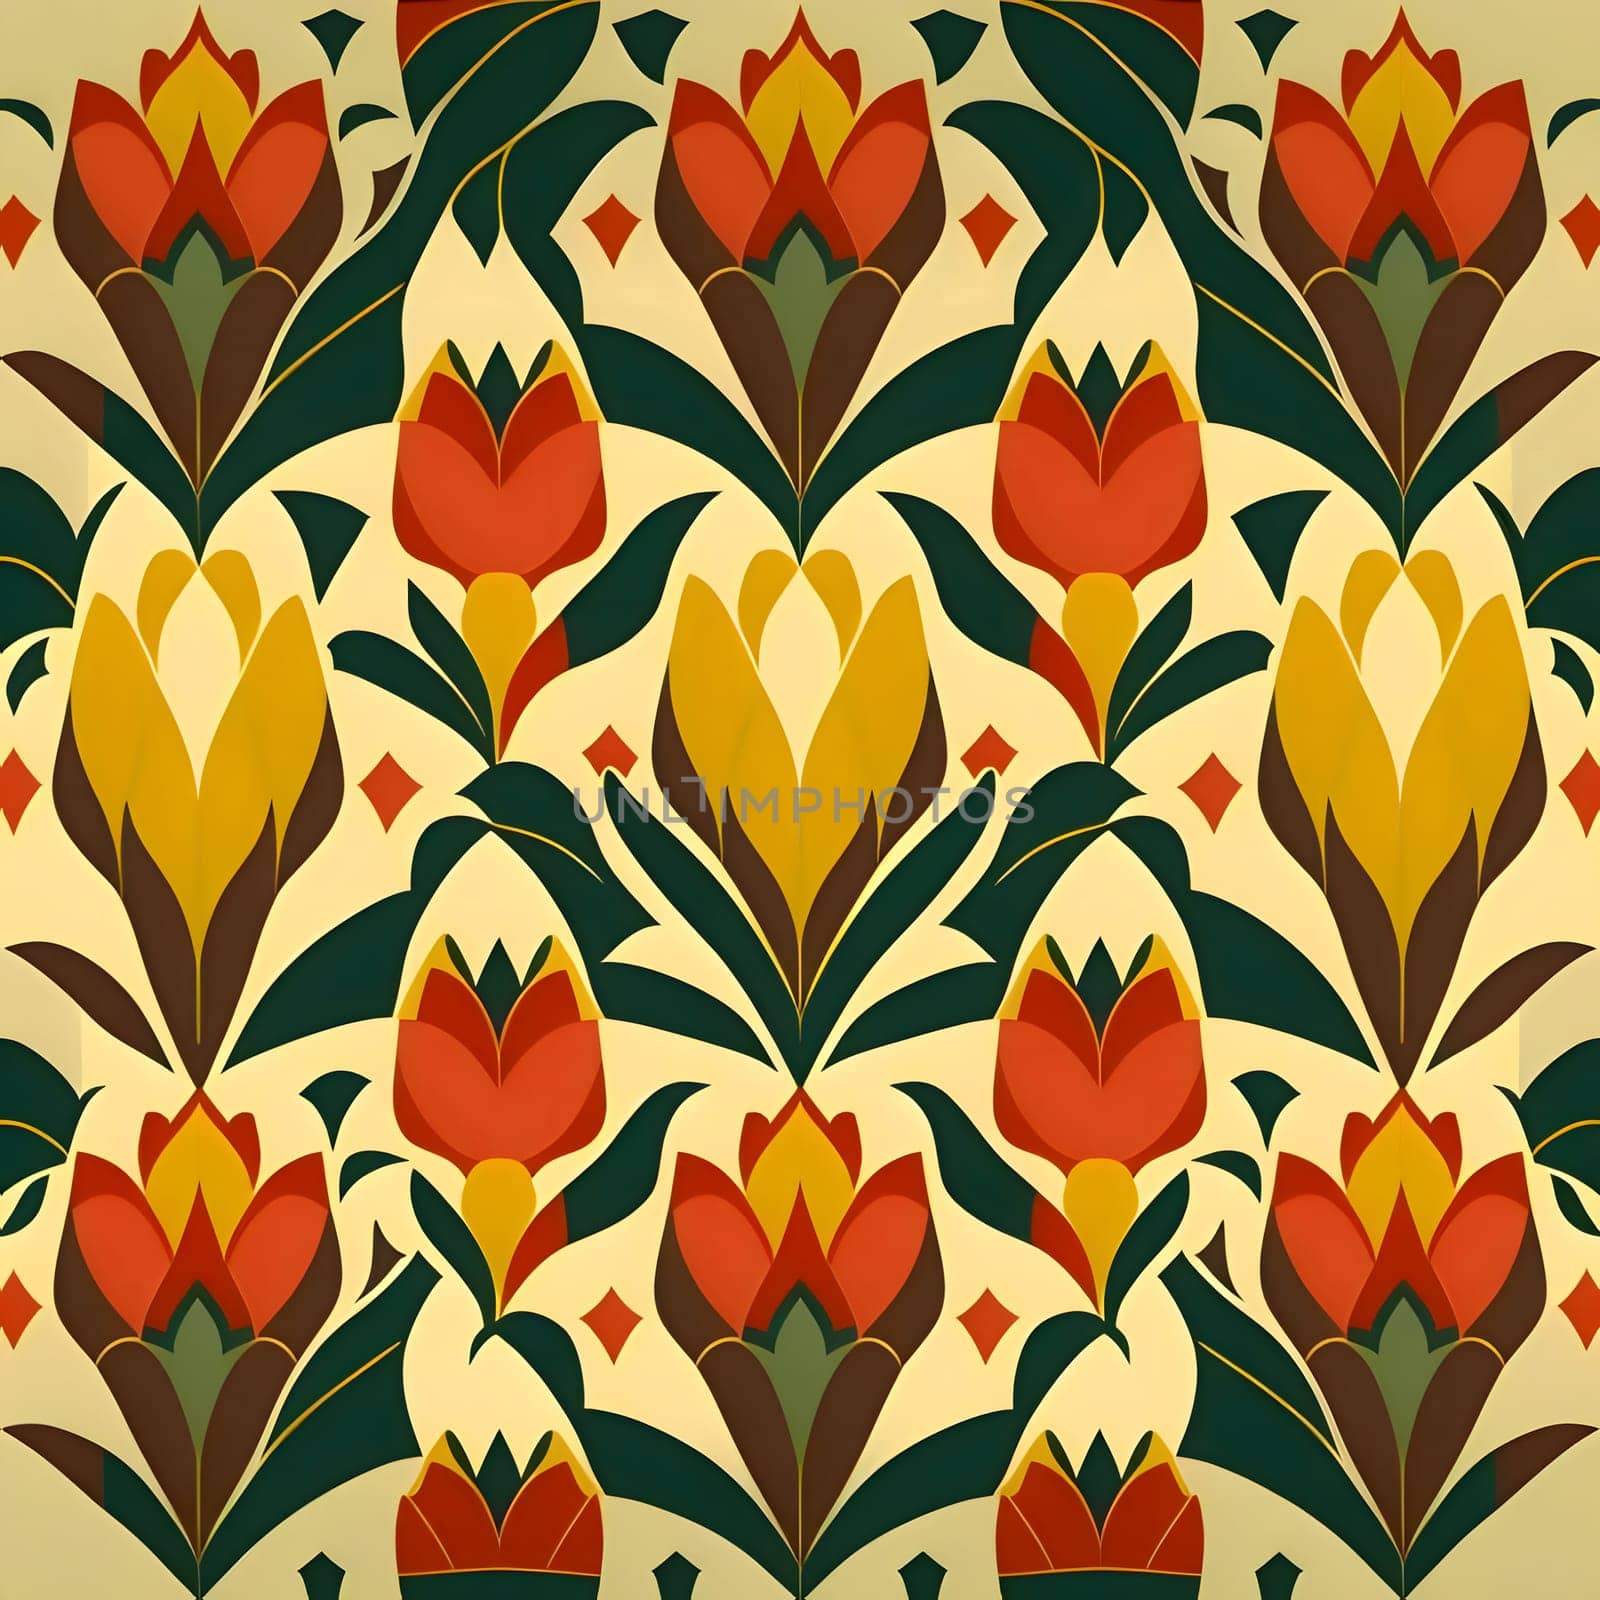 Patterns and banners backgrounds: Seamless pattern with tulips. Vector illustration in retro style.